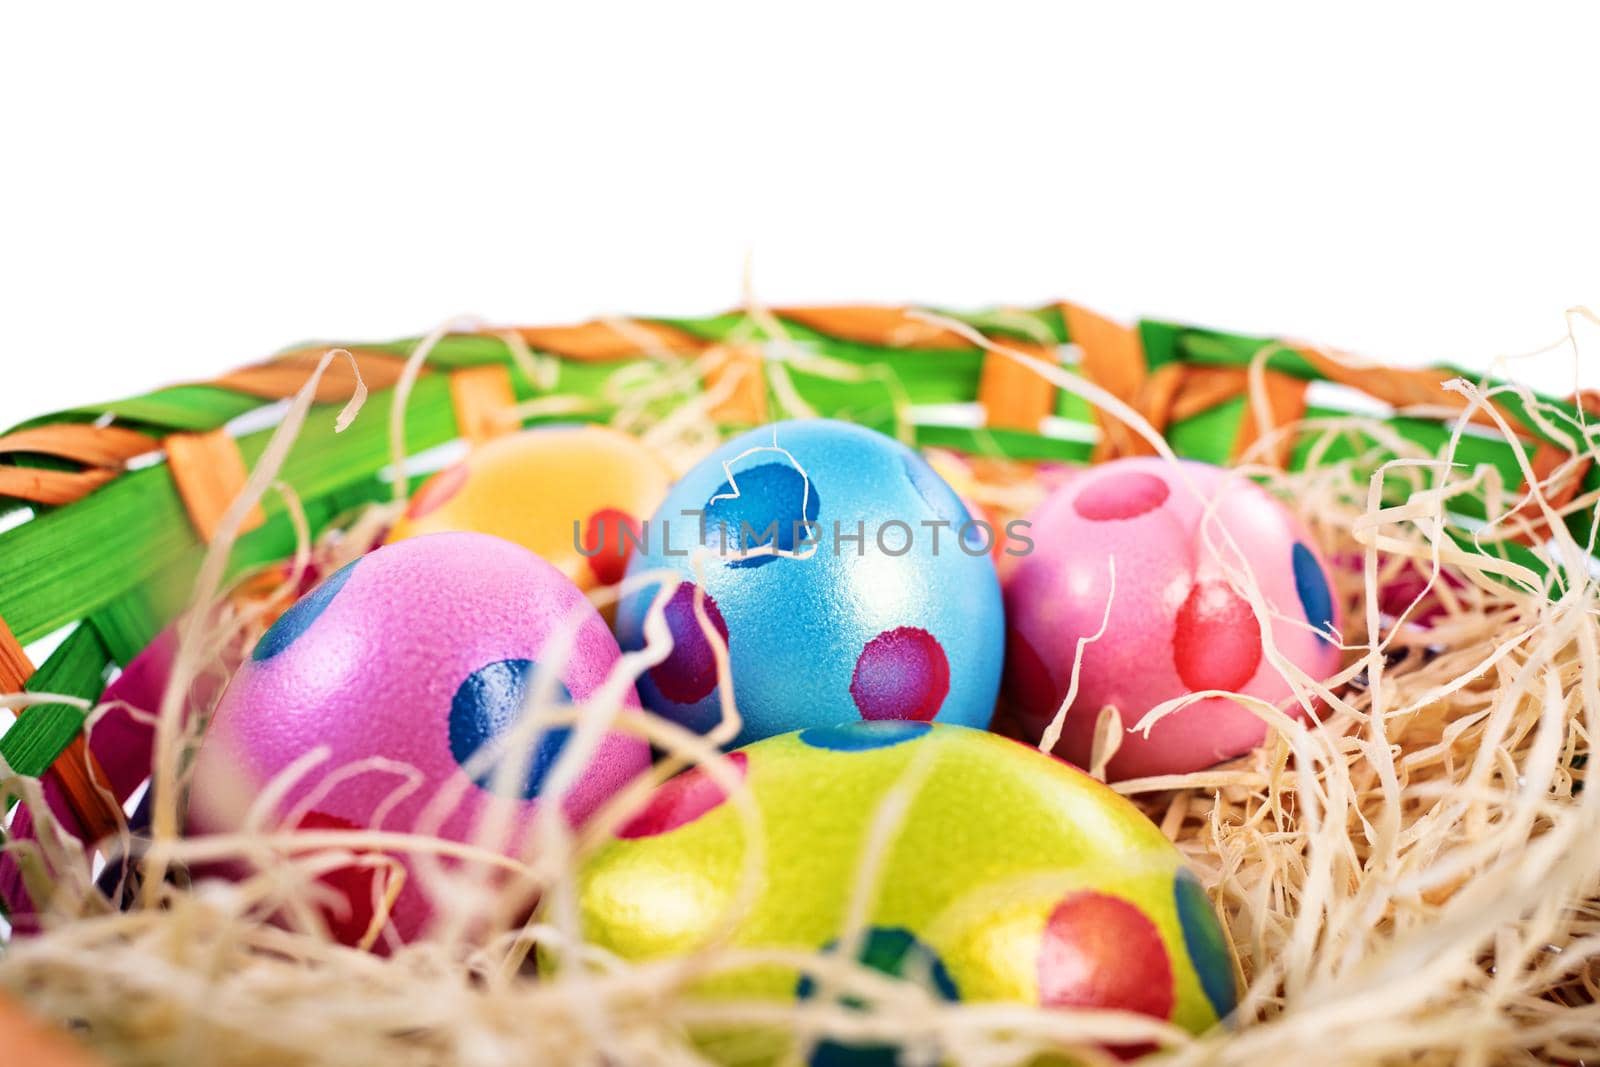 Colourful Easter eggs with polka dots in a basket by Mendelex